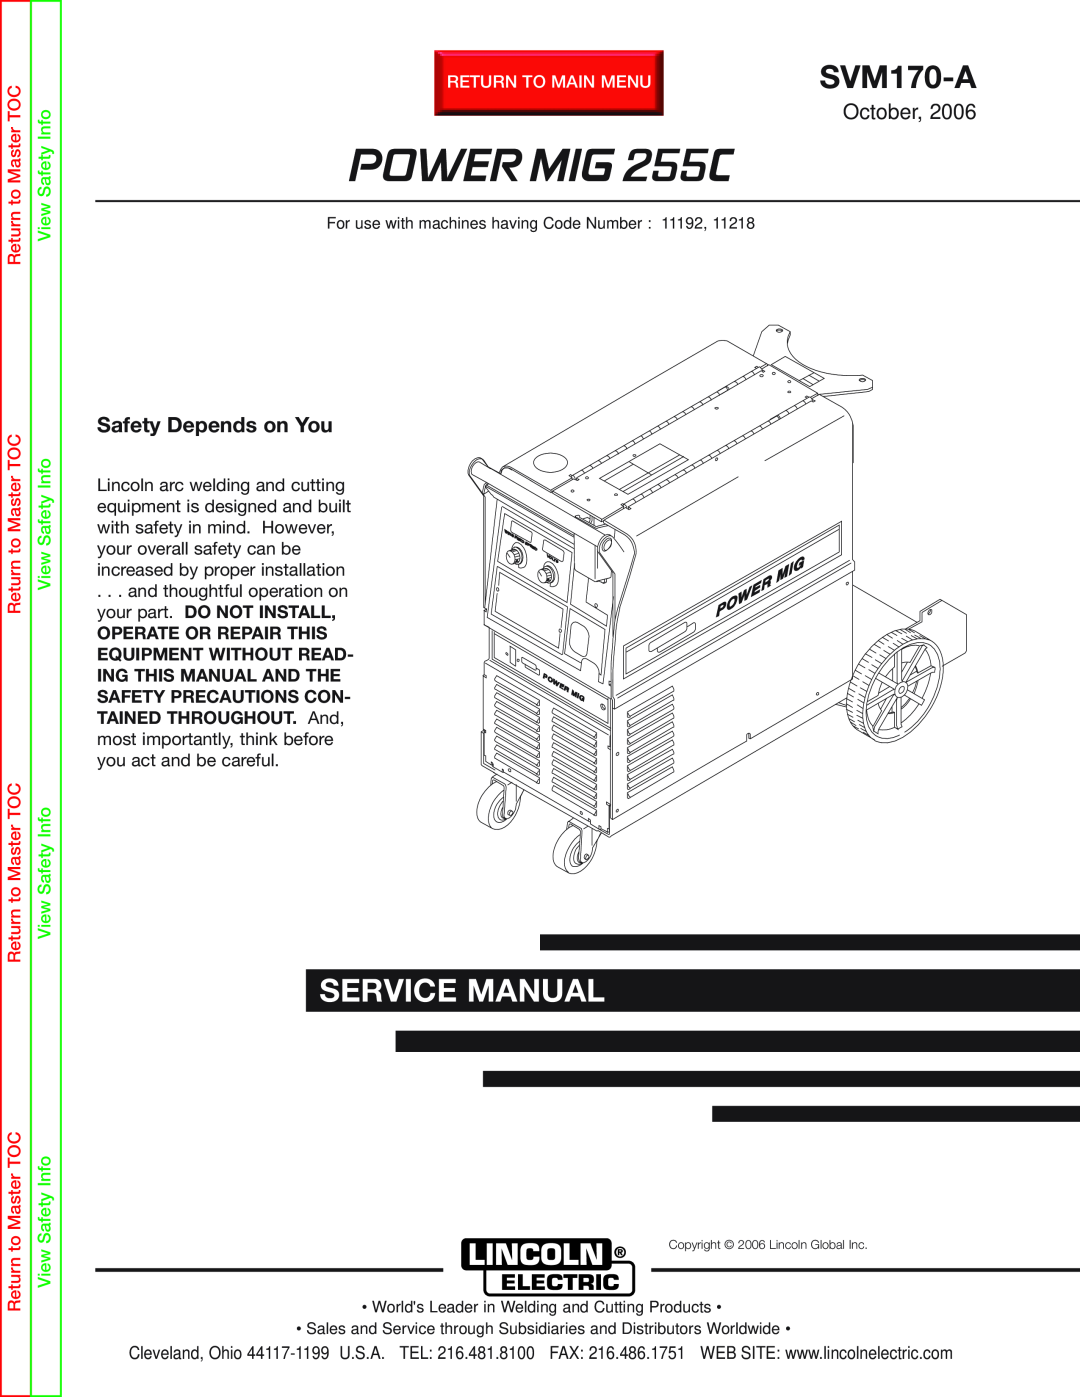 Lincoln Electric SVM170-A service manual POWER MIG 255C, Service Manual, October, Safety Depends on You 